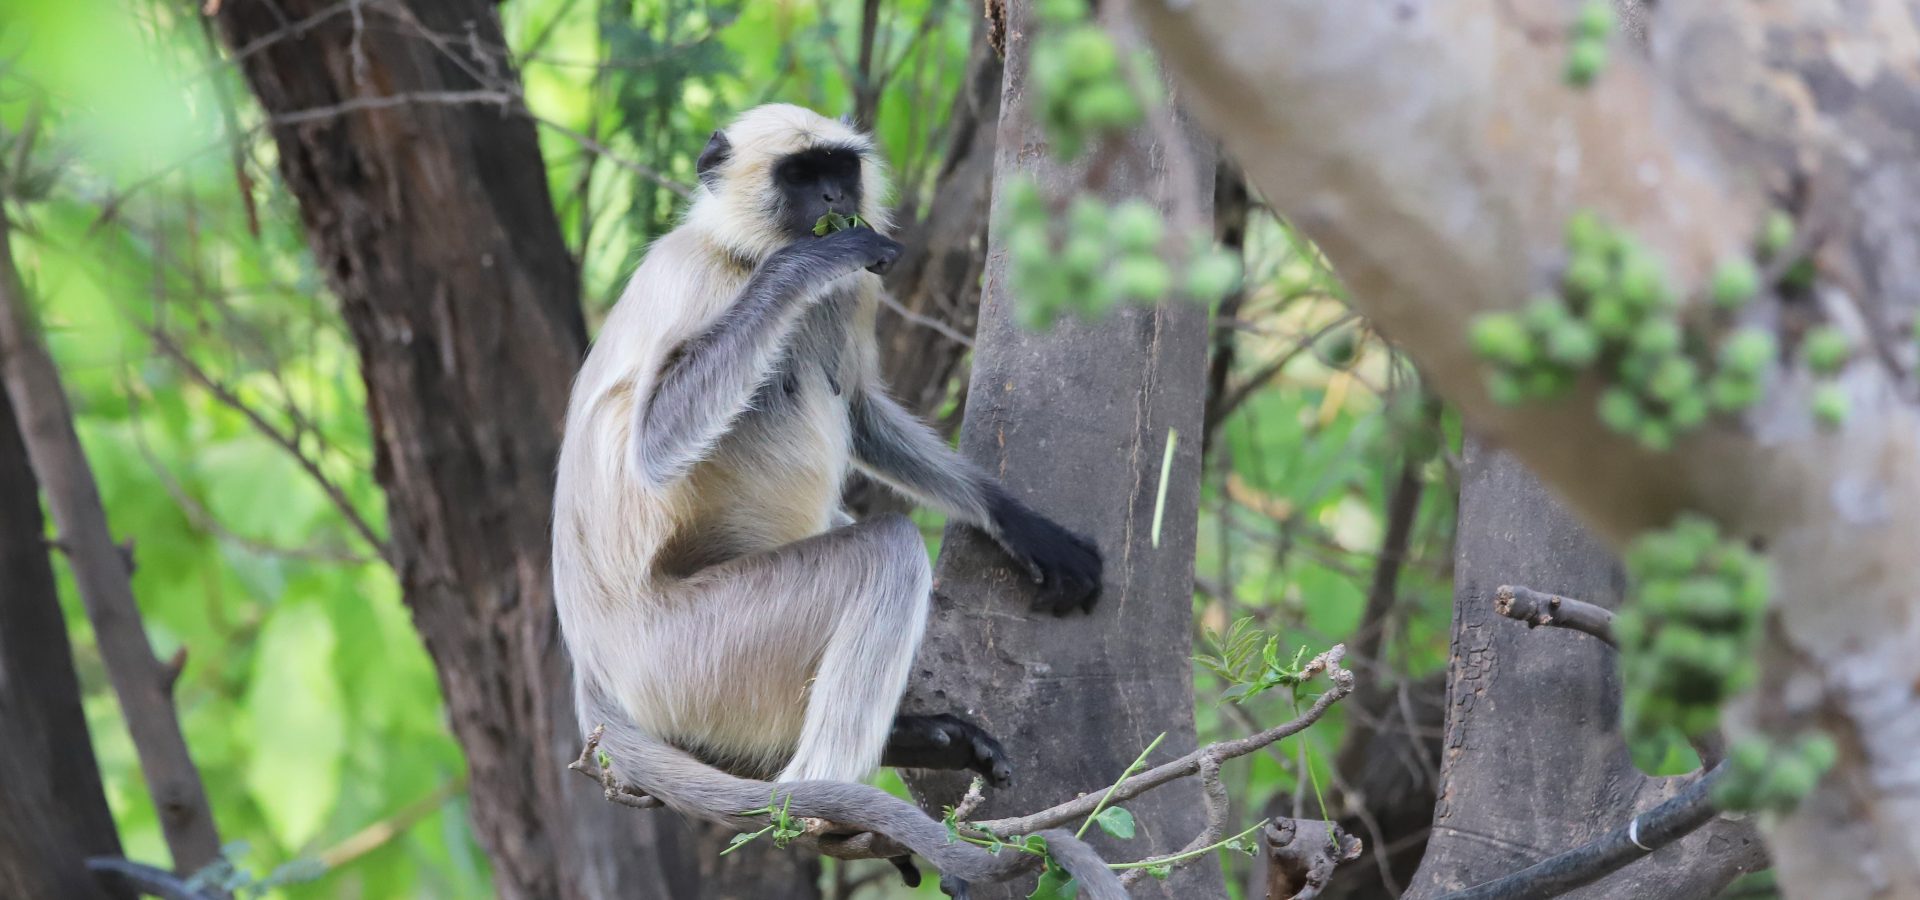 Monkey cruelty on the rise as social media continues providing a